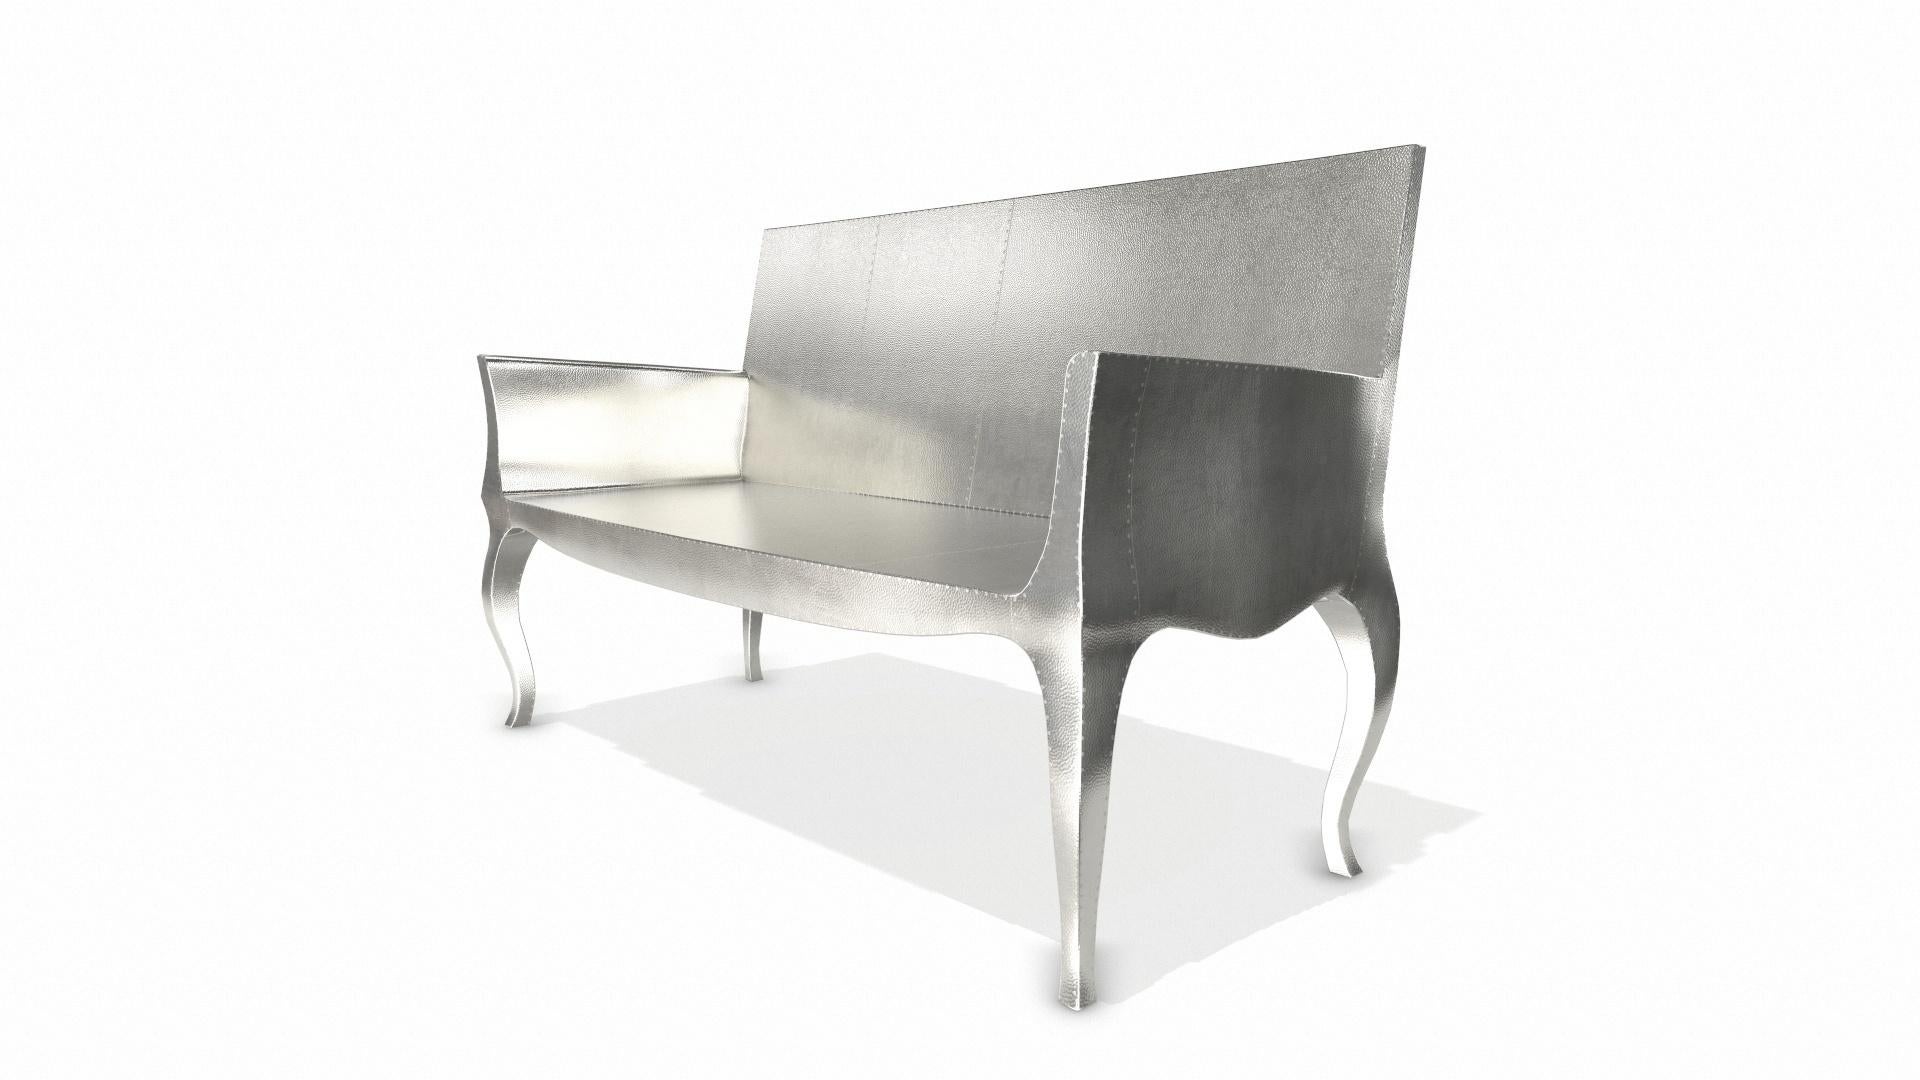 Woodwork Louise Settee Art Deco Canapes in Mid. Hammered White Bronze by Paul Mathieu For Sale